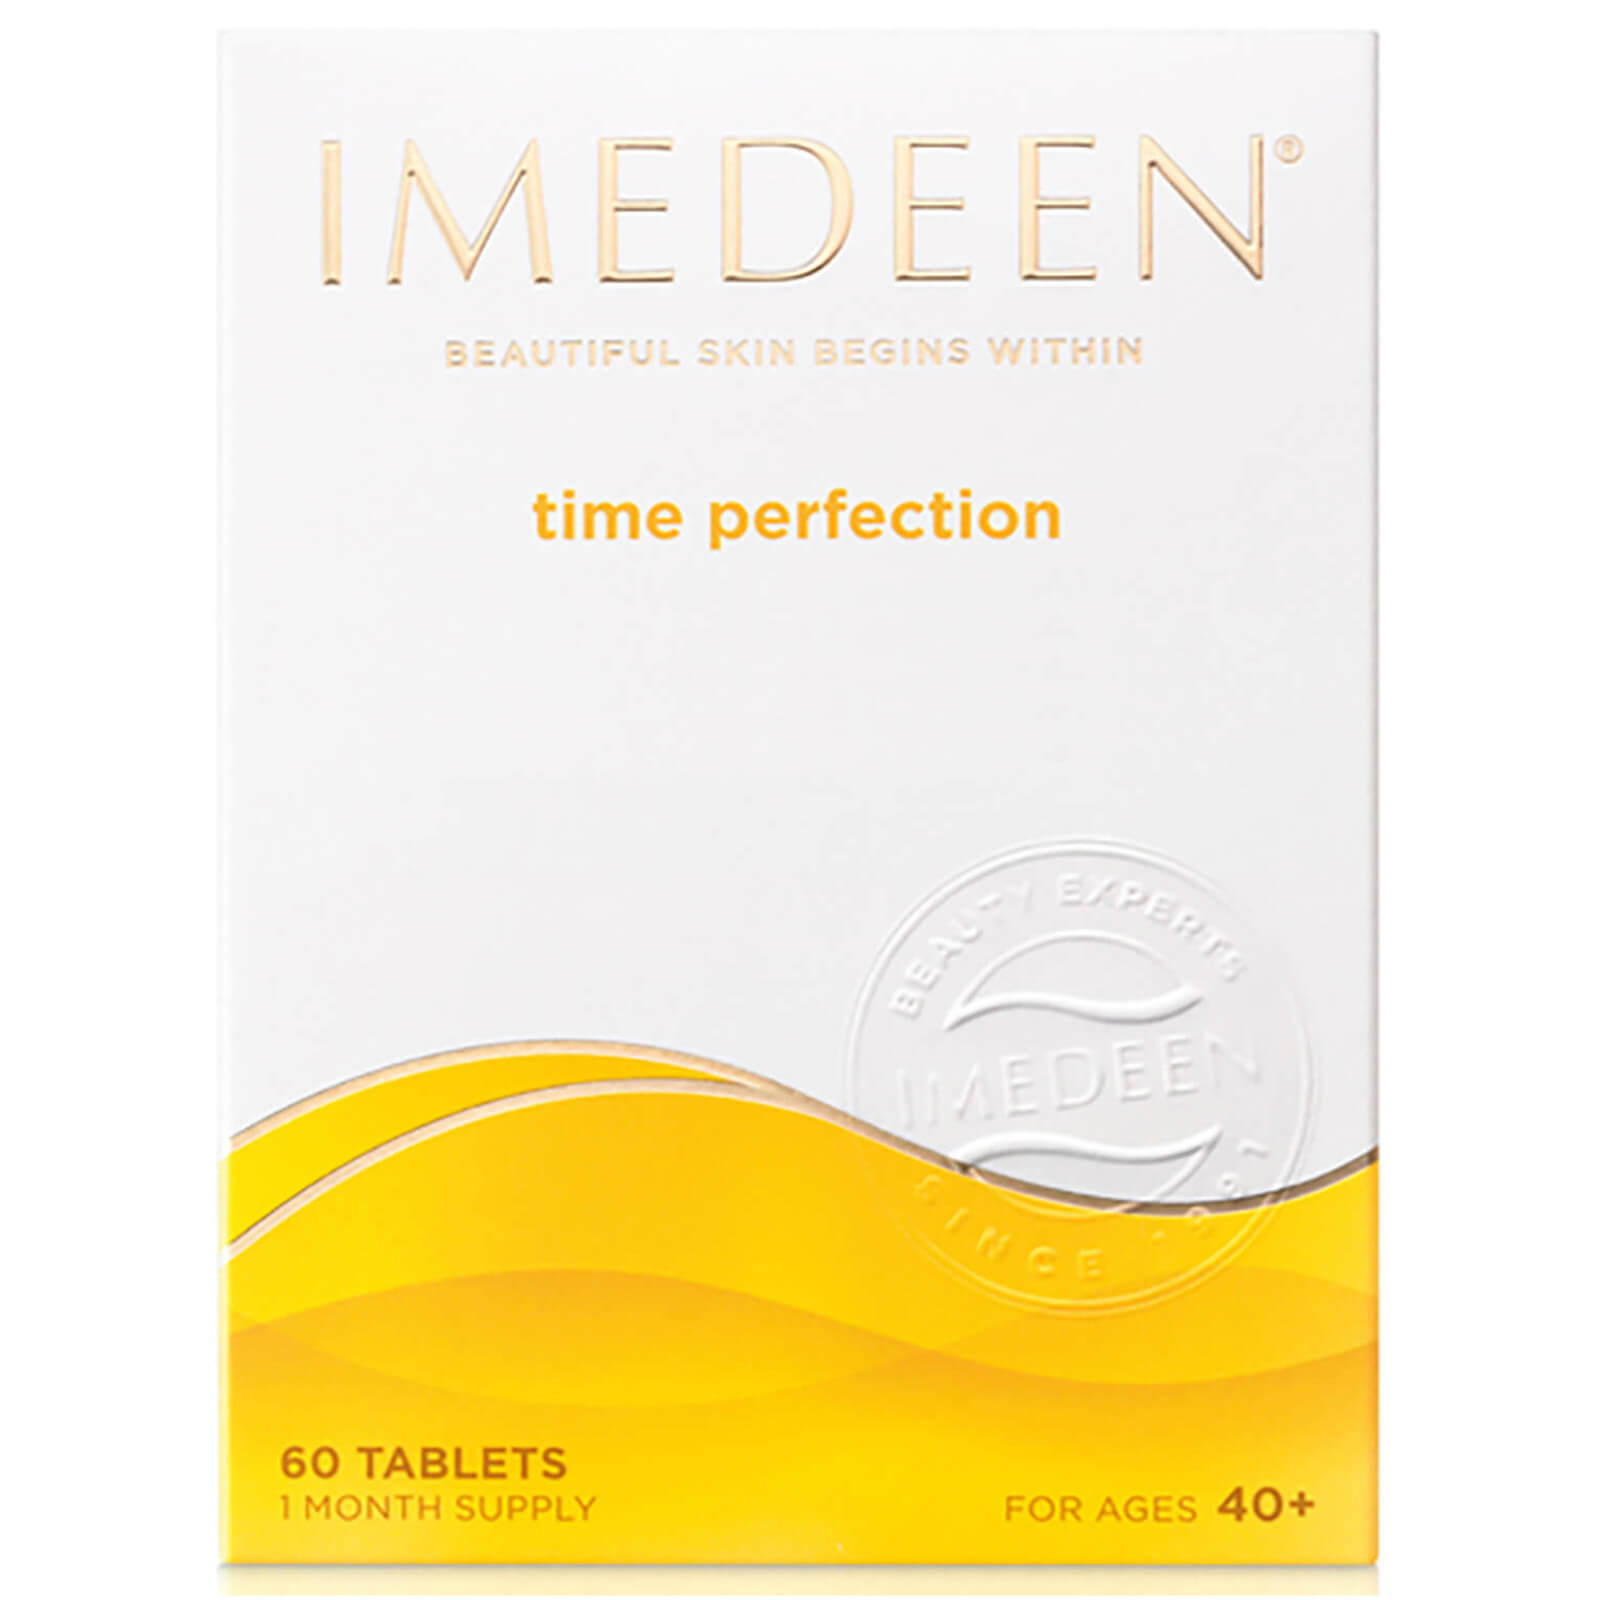 Imedeen Time Perfection (60 Tablets) (Age 40+) lookfantastic.com imagine